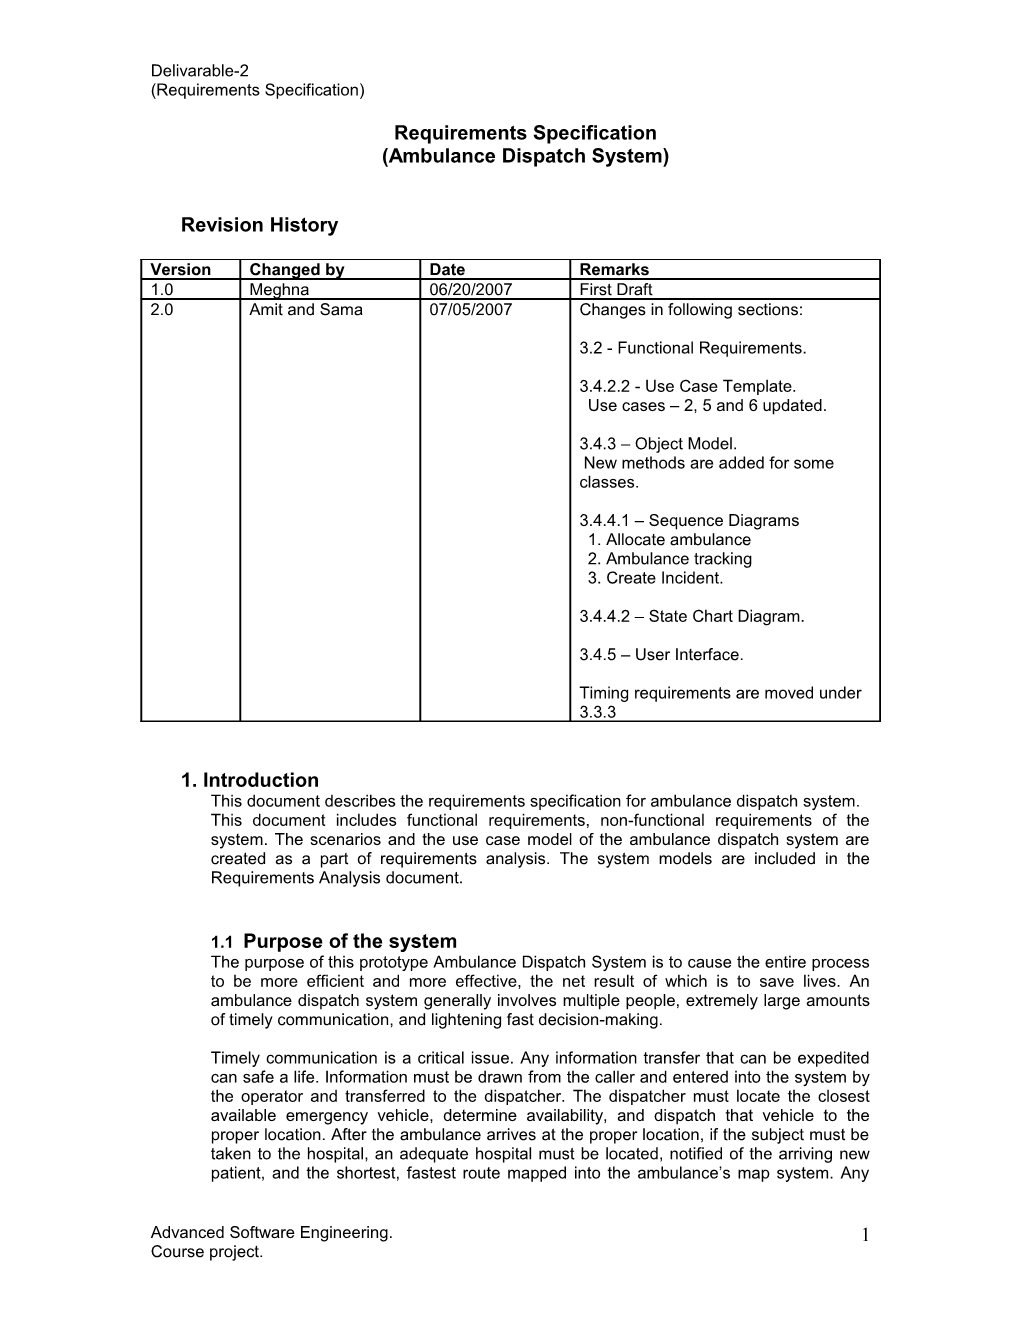 Delivarable-2 (Requirements Specification)